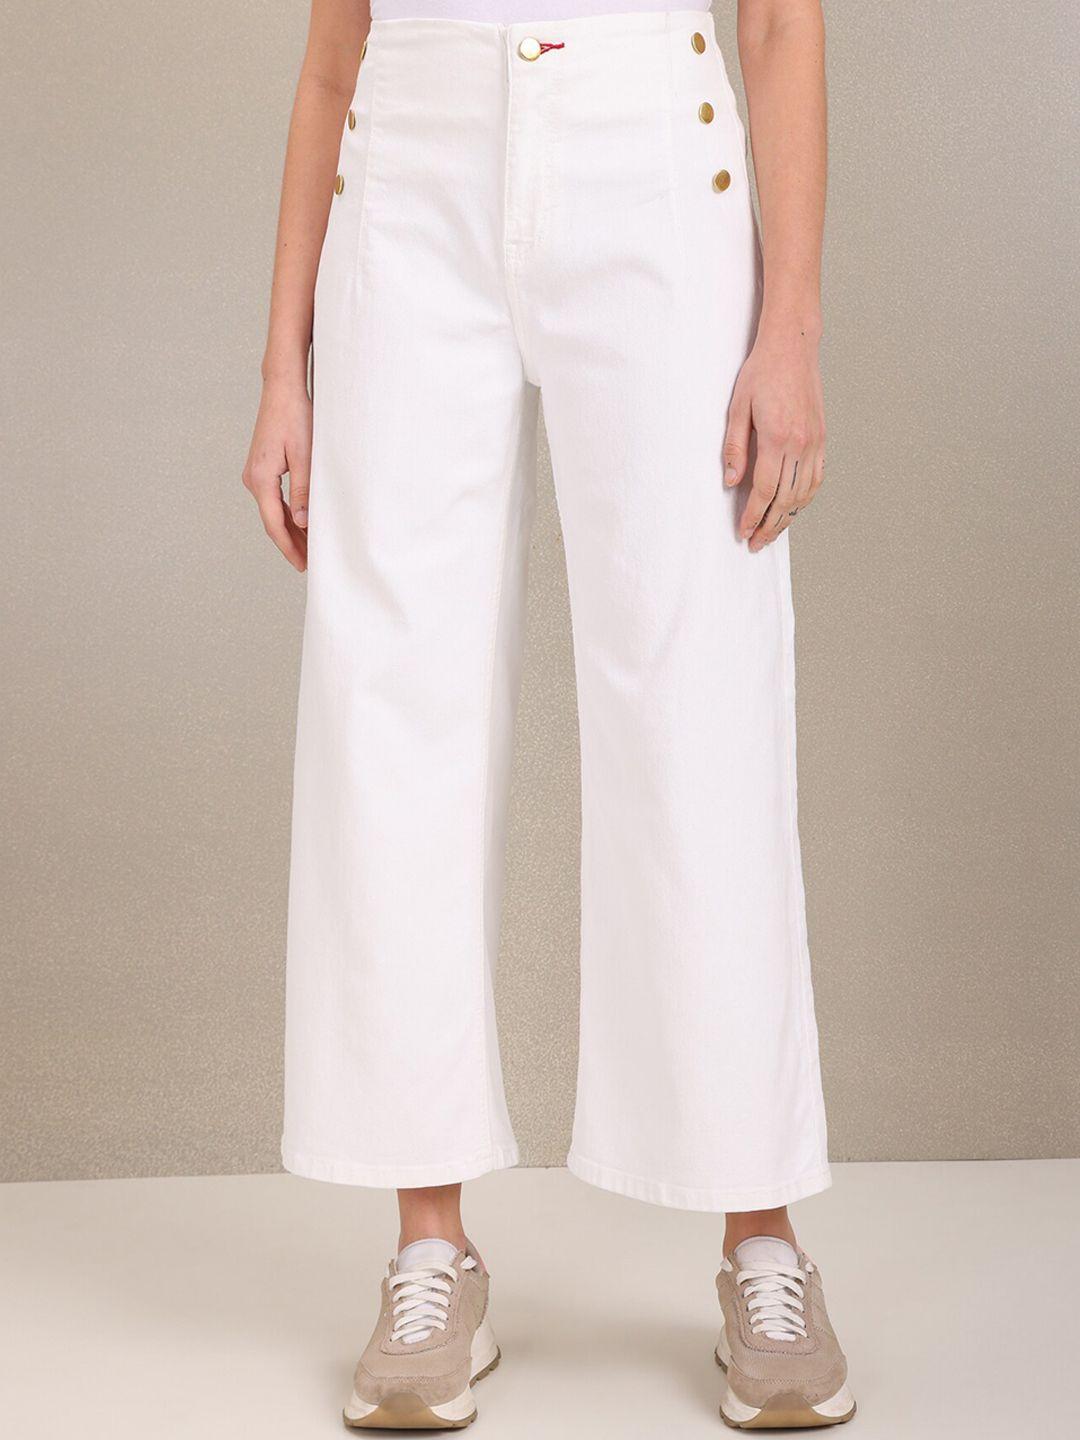 u-s-polo-assn-women-off-white-wide-leg-stretchable-jeans